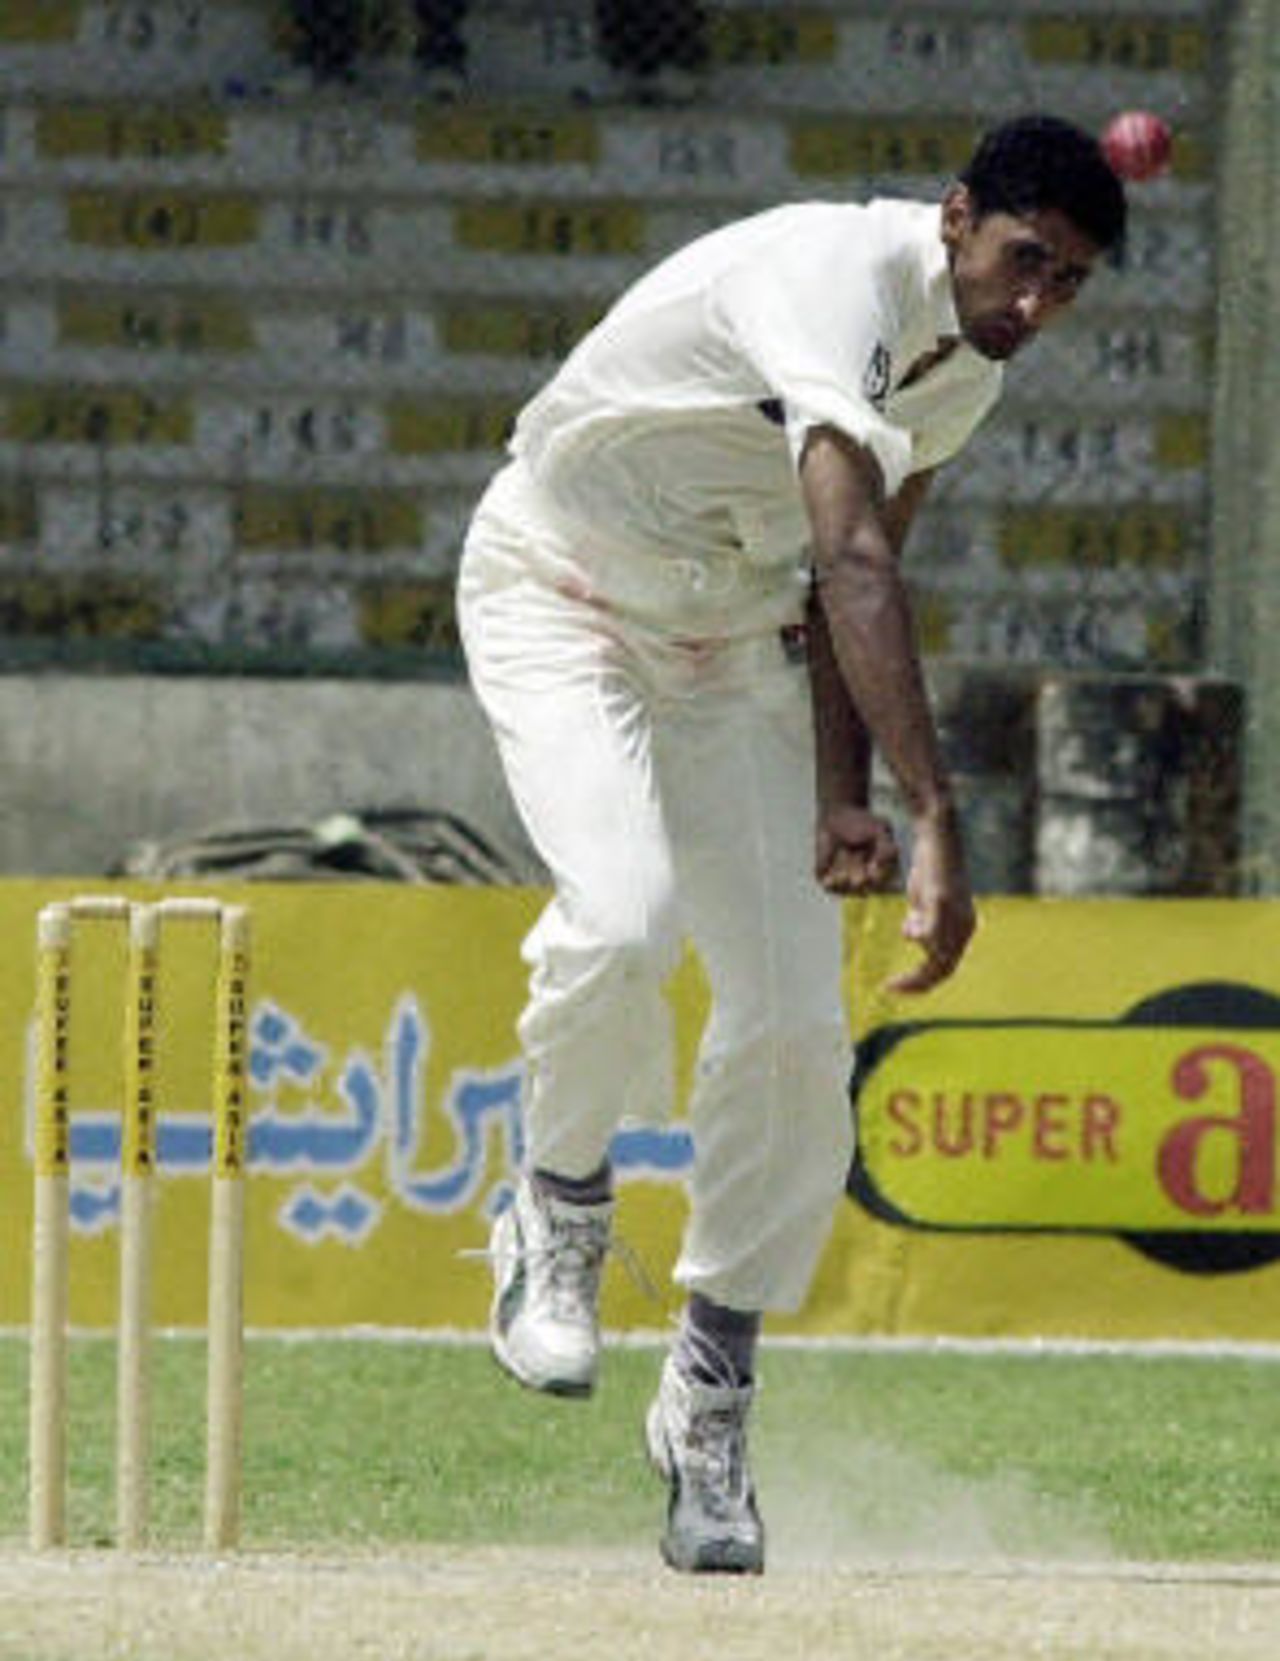 Shabbir Ahmed delivers a ball during the fourth day of the first Test match between Pakistan and Bangladesh in Karachi, 23 August 2003.